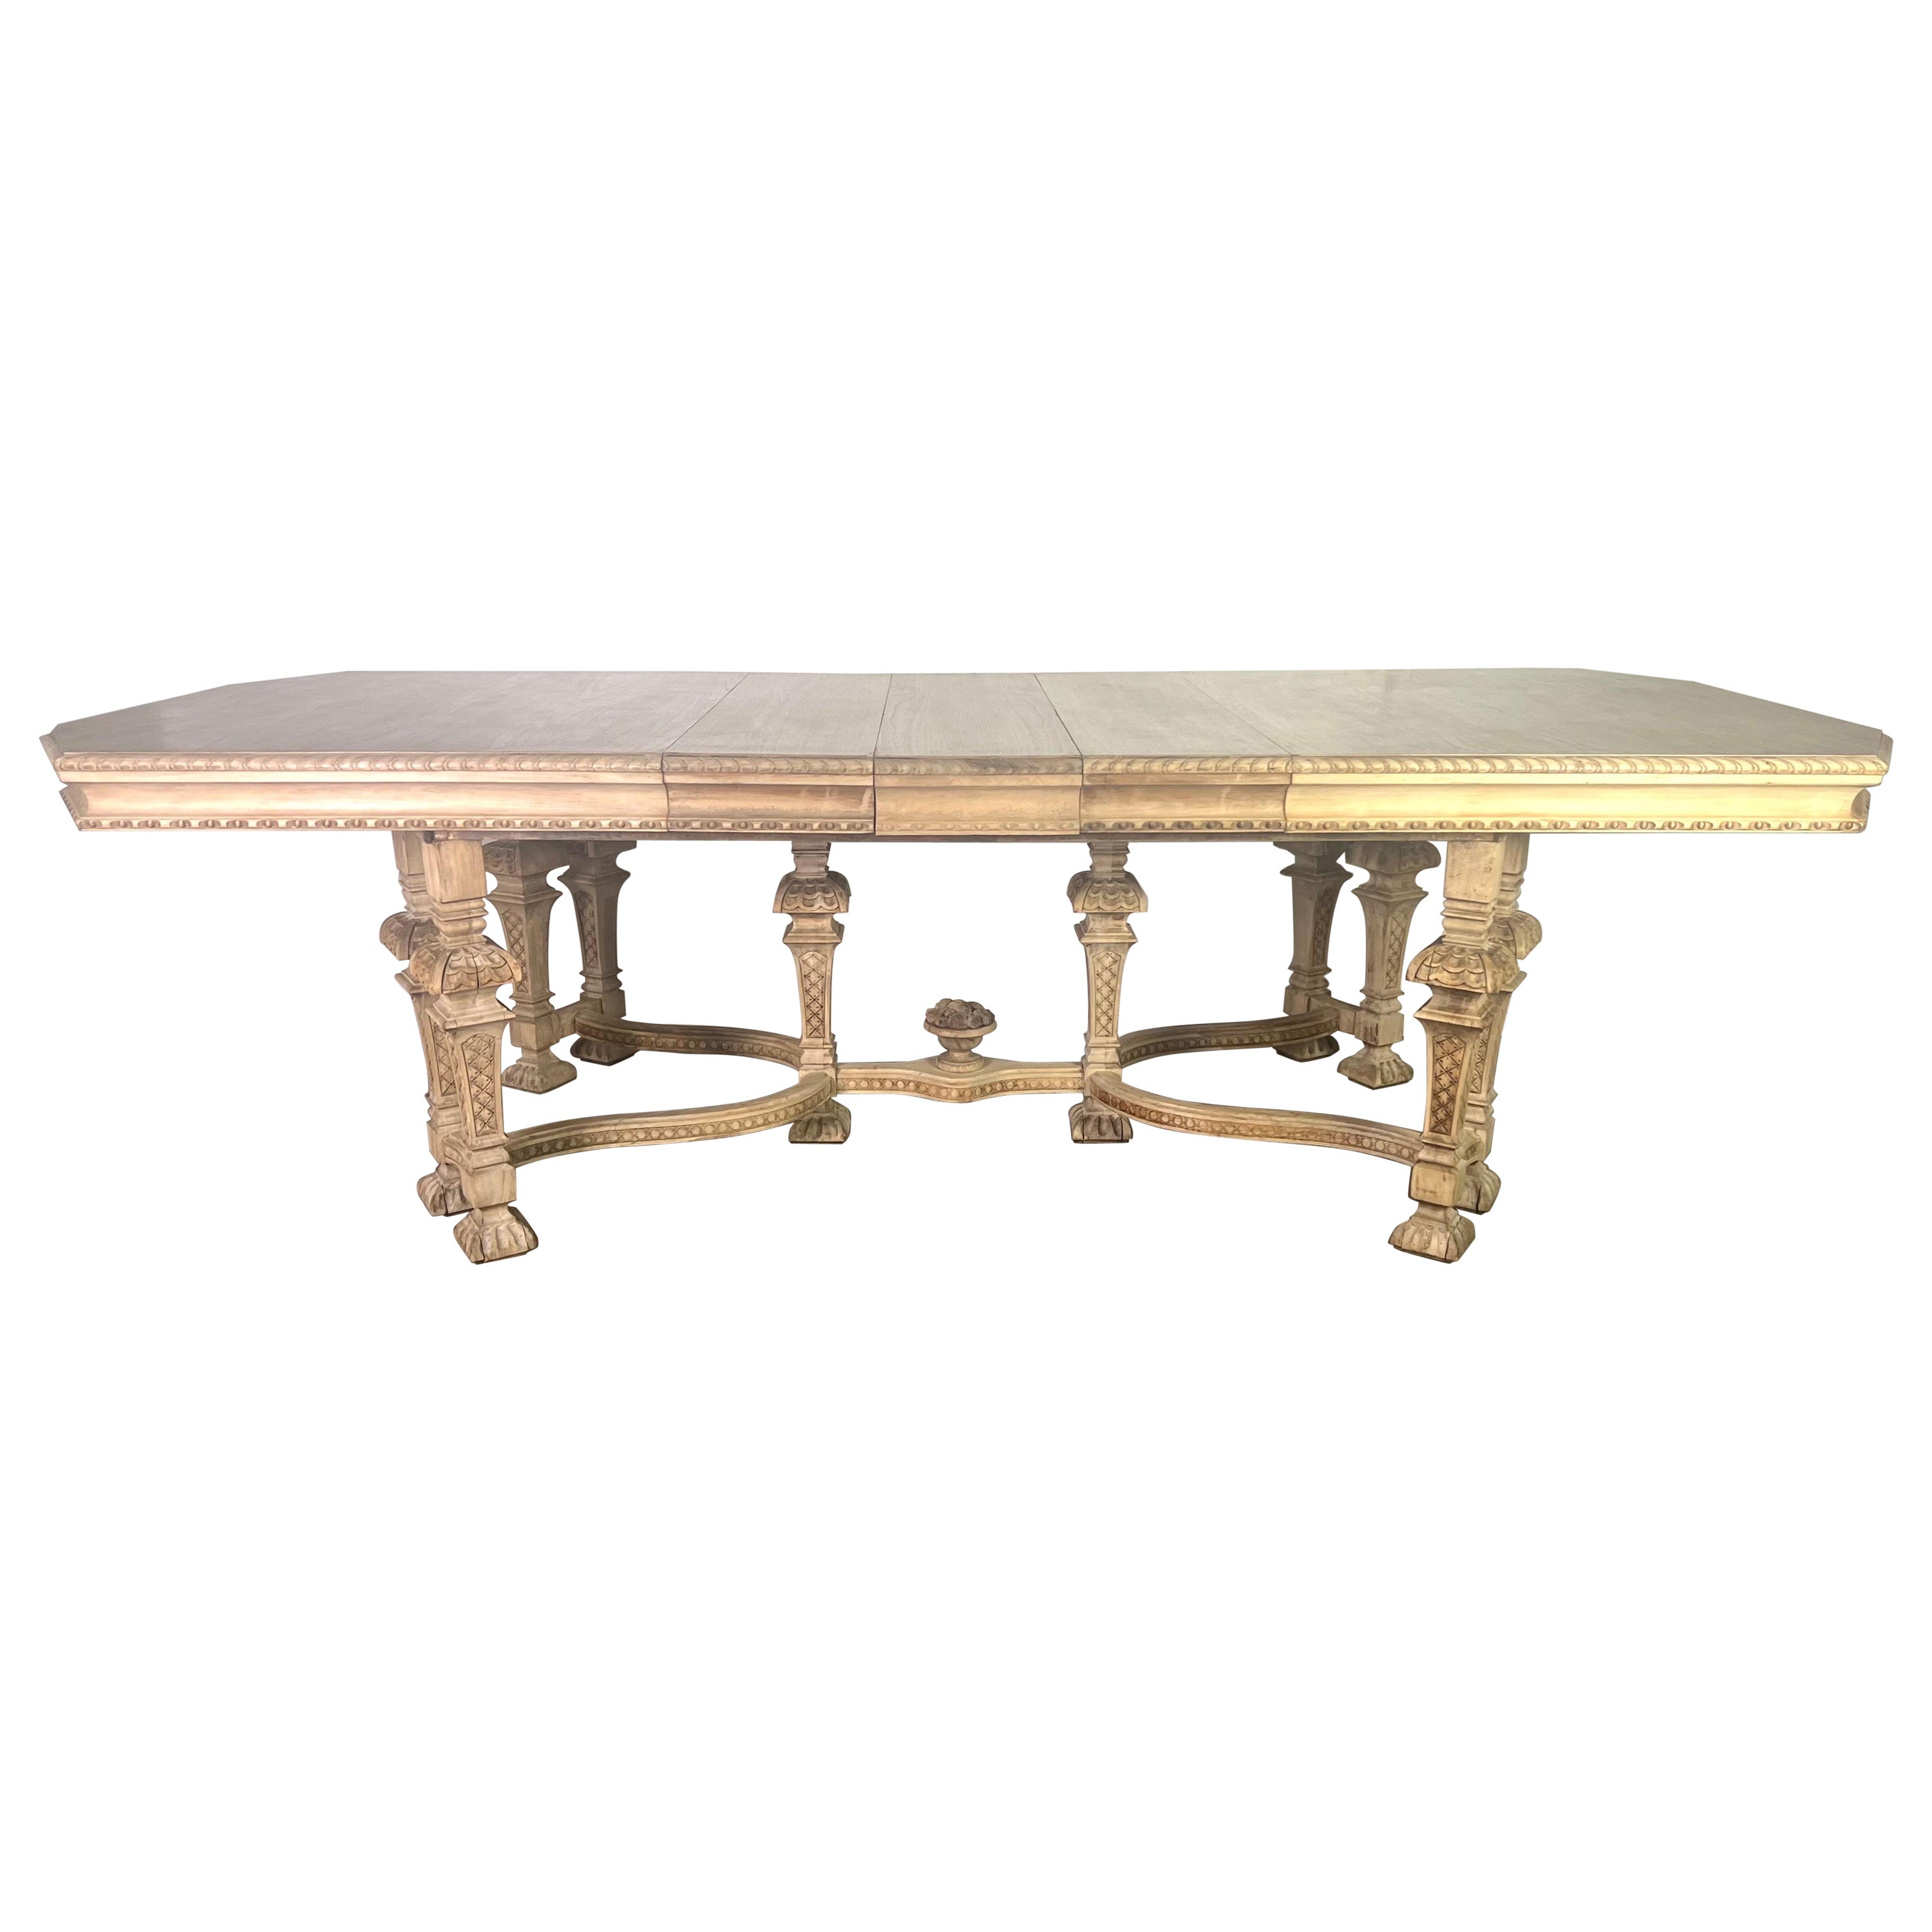 19th Century Italian Baroque Style Dining Table w/ Leaves